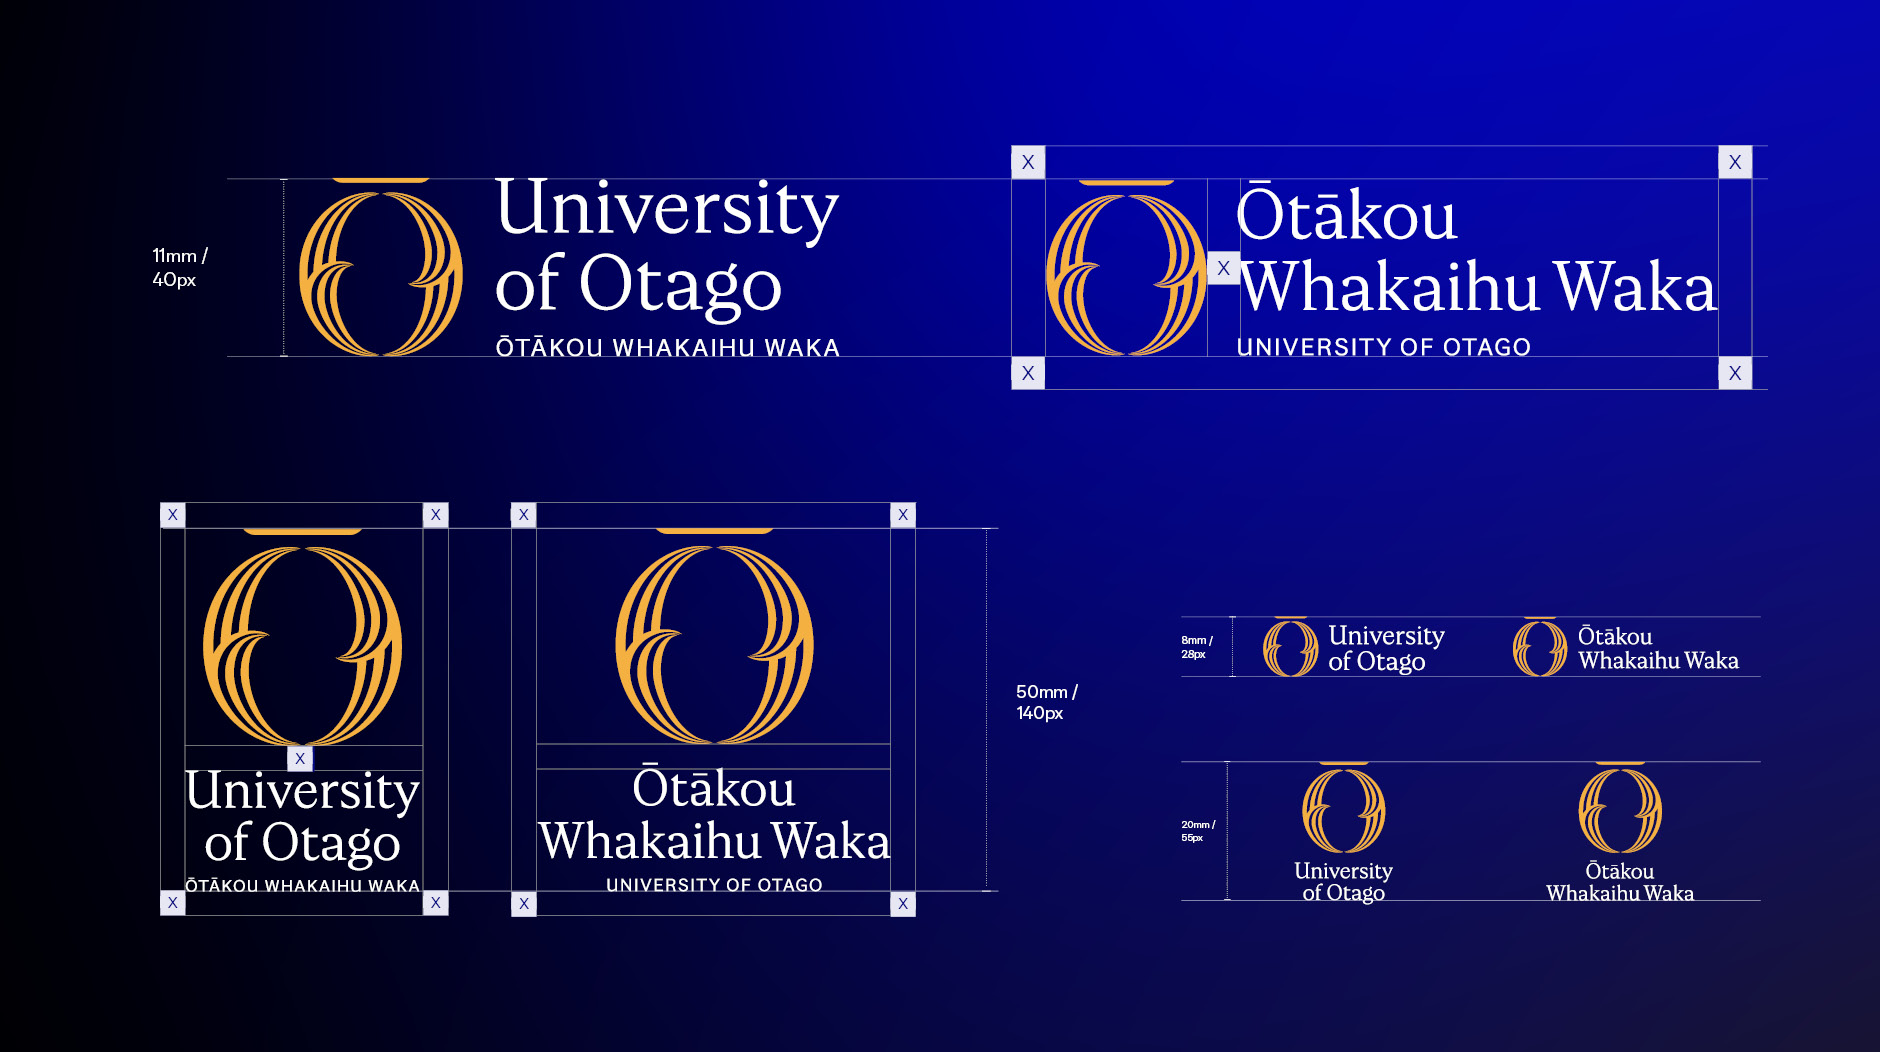 Examples of the University of Otago wordmark, showing correct size and spacing.